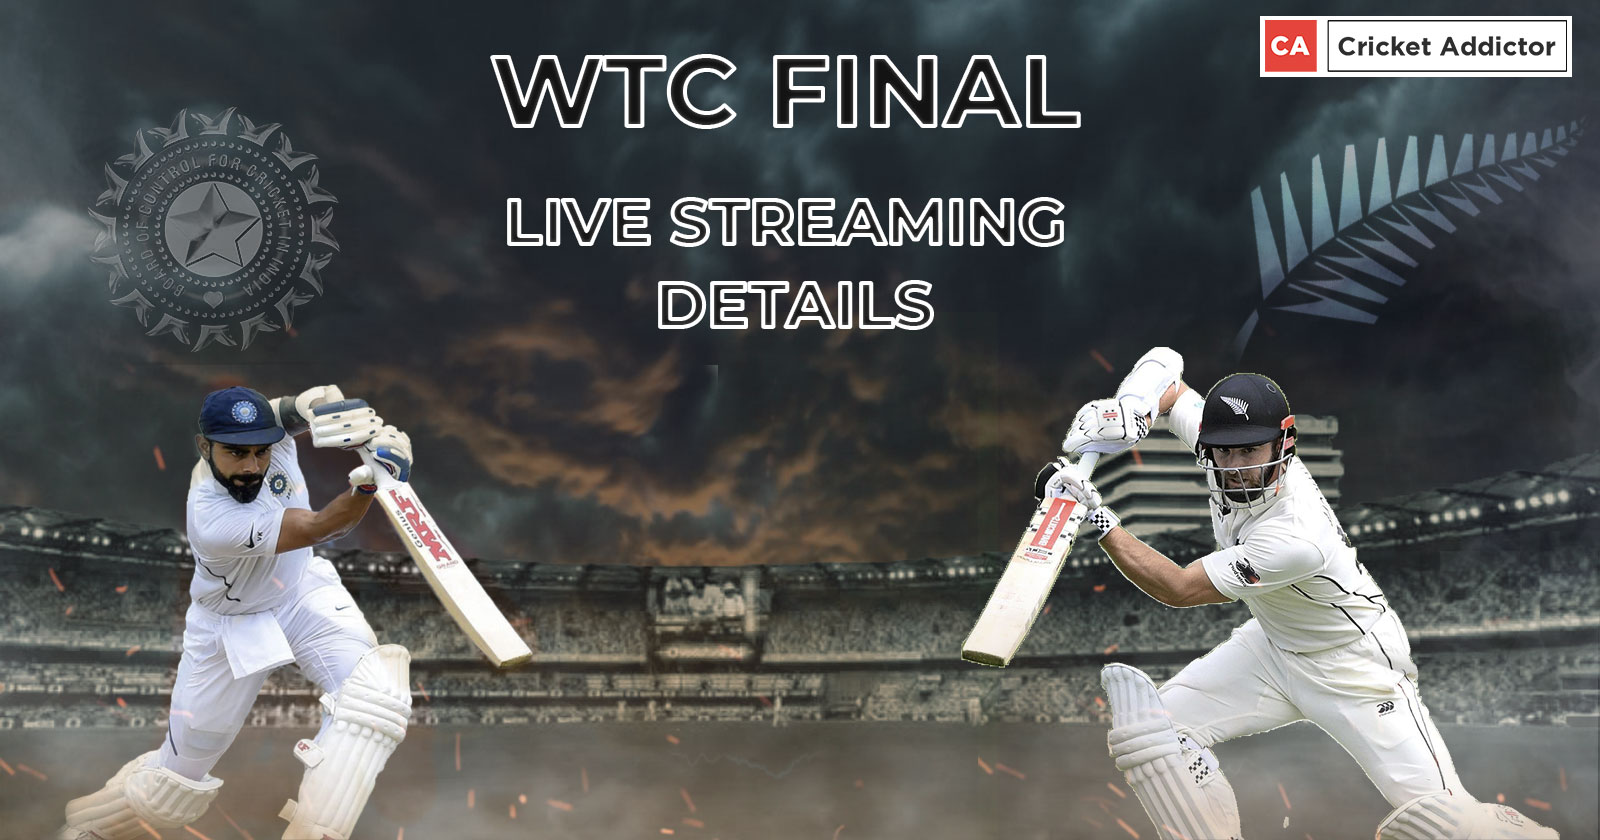 India vs New Zealand WTC Final: When And Where To Watch, Live Streaming Details